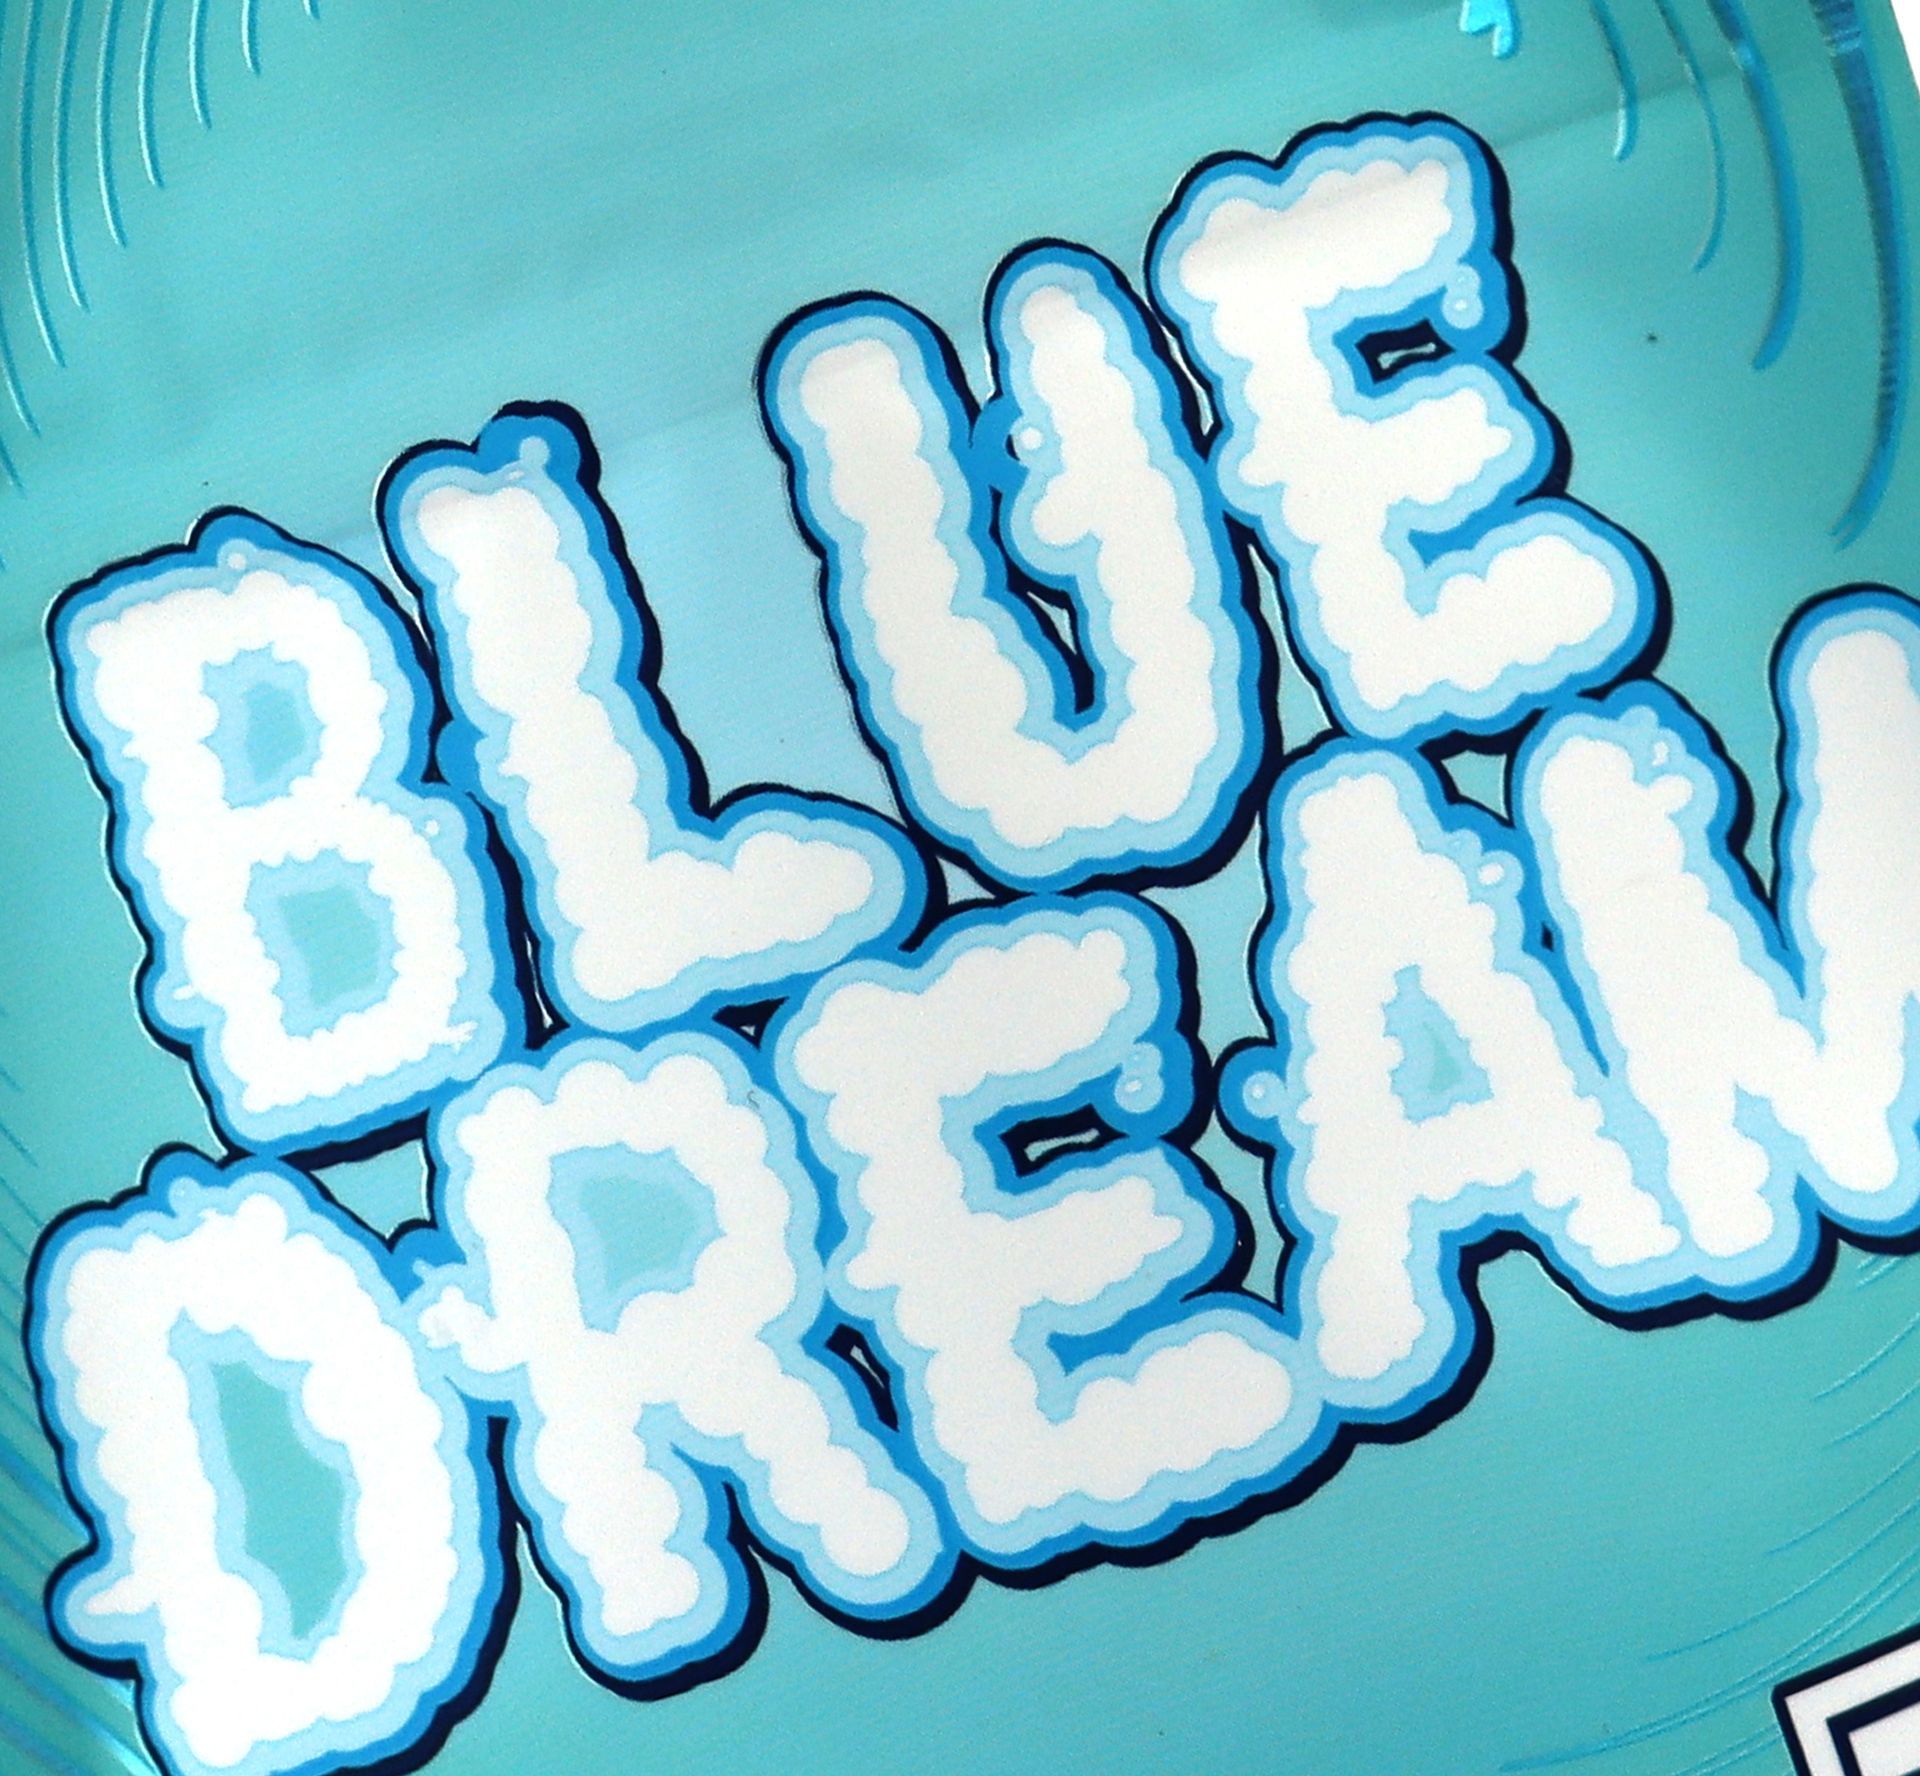 close up of blue dream weed packaging graphic